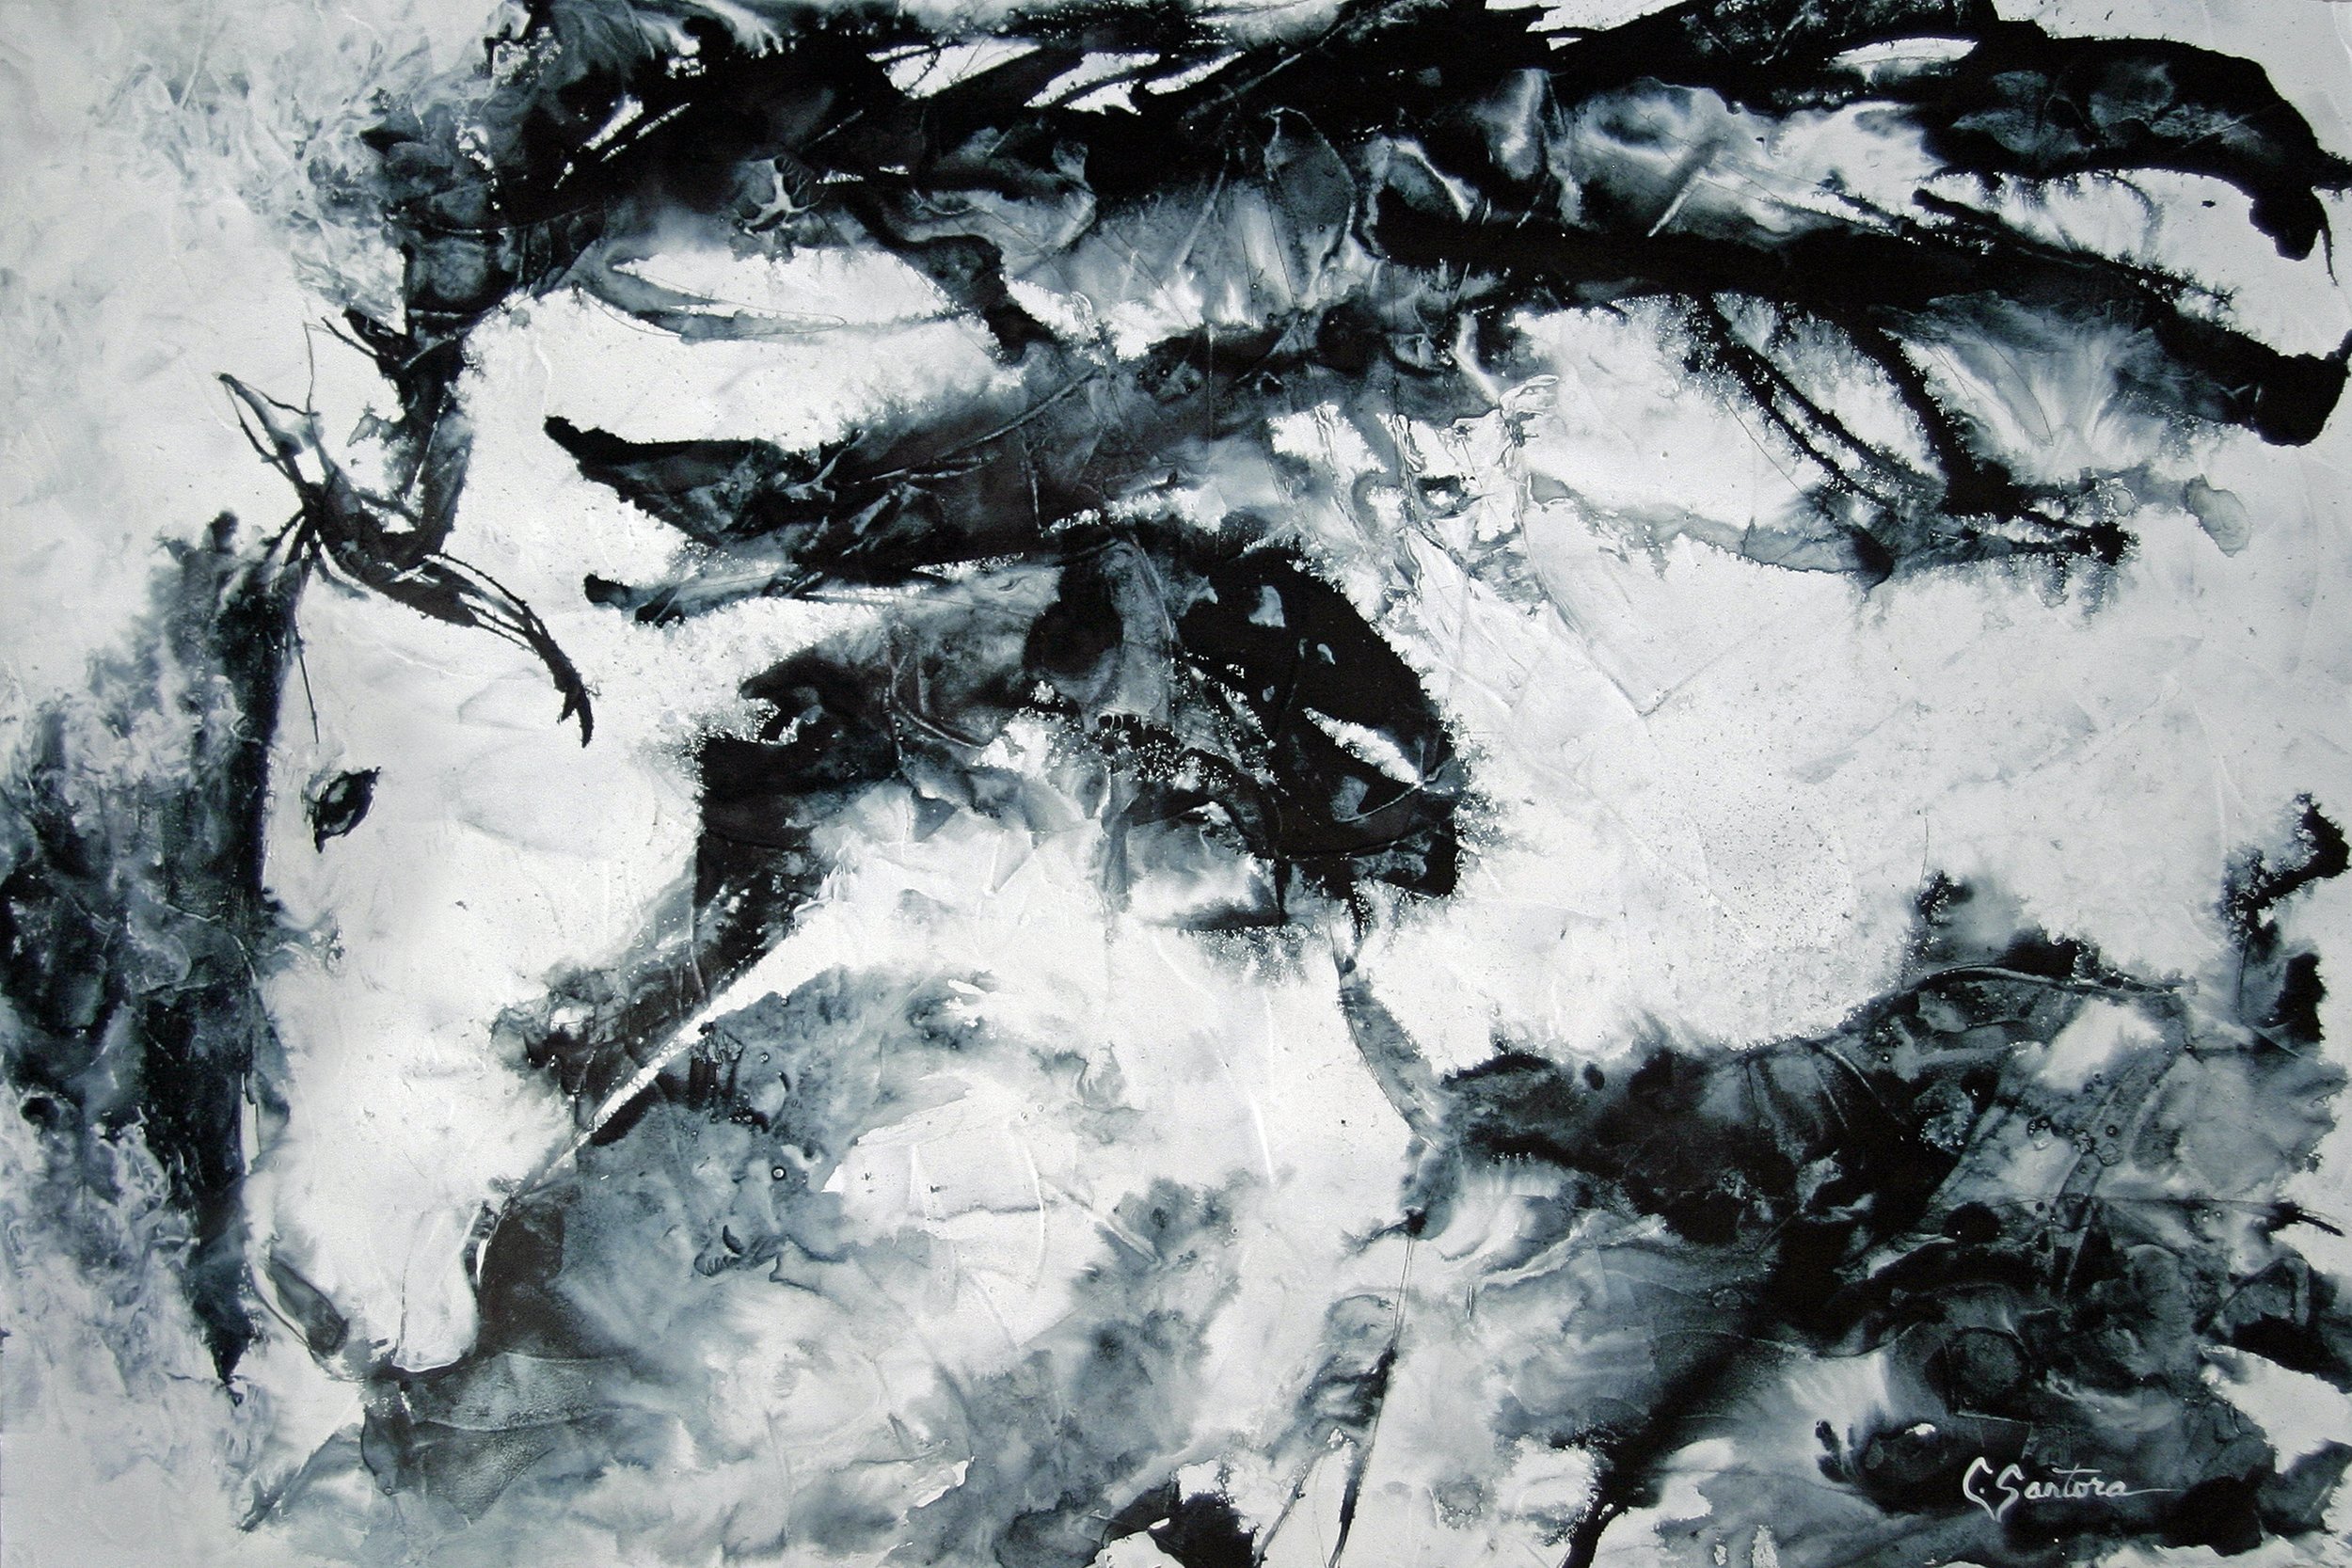 Carol Santora; Wind Horse, 2020, Original Painting Acrylic, 30 x 20 inches. Artwork description: 241 Abstract horse painting, black and white expressionist series...